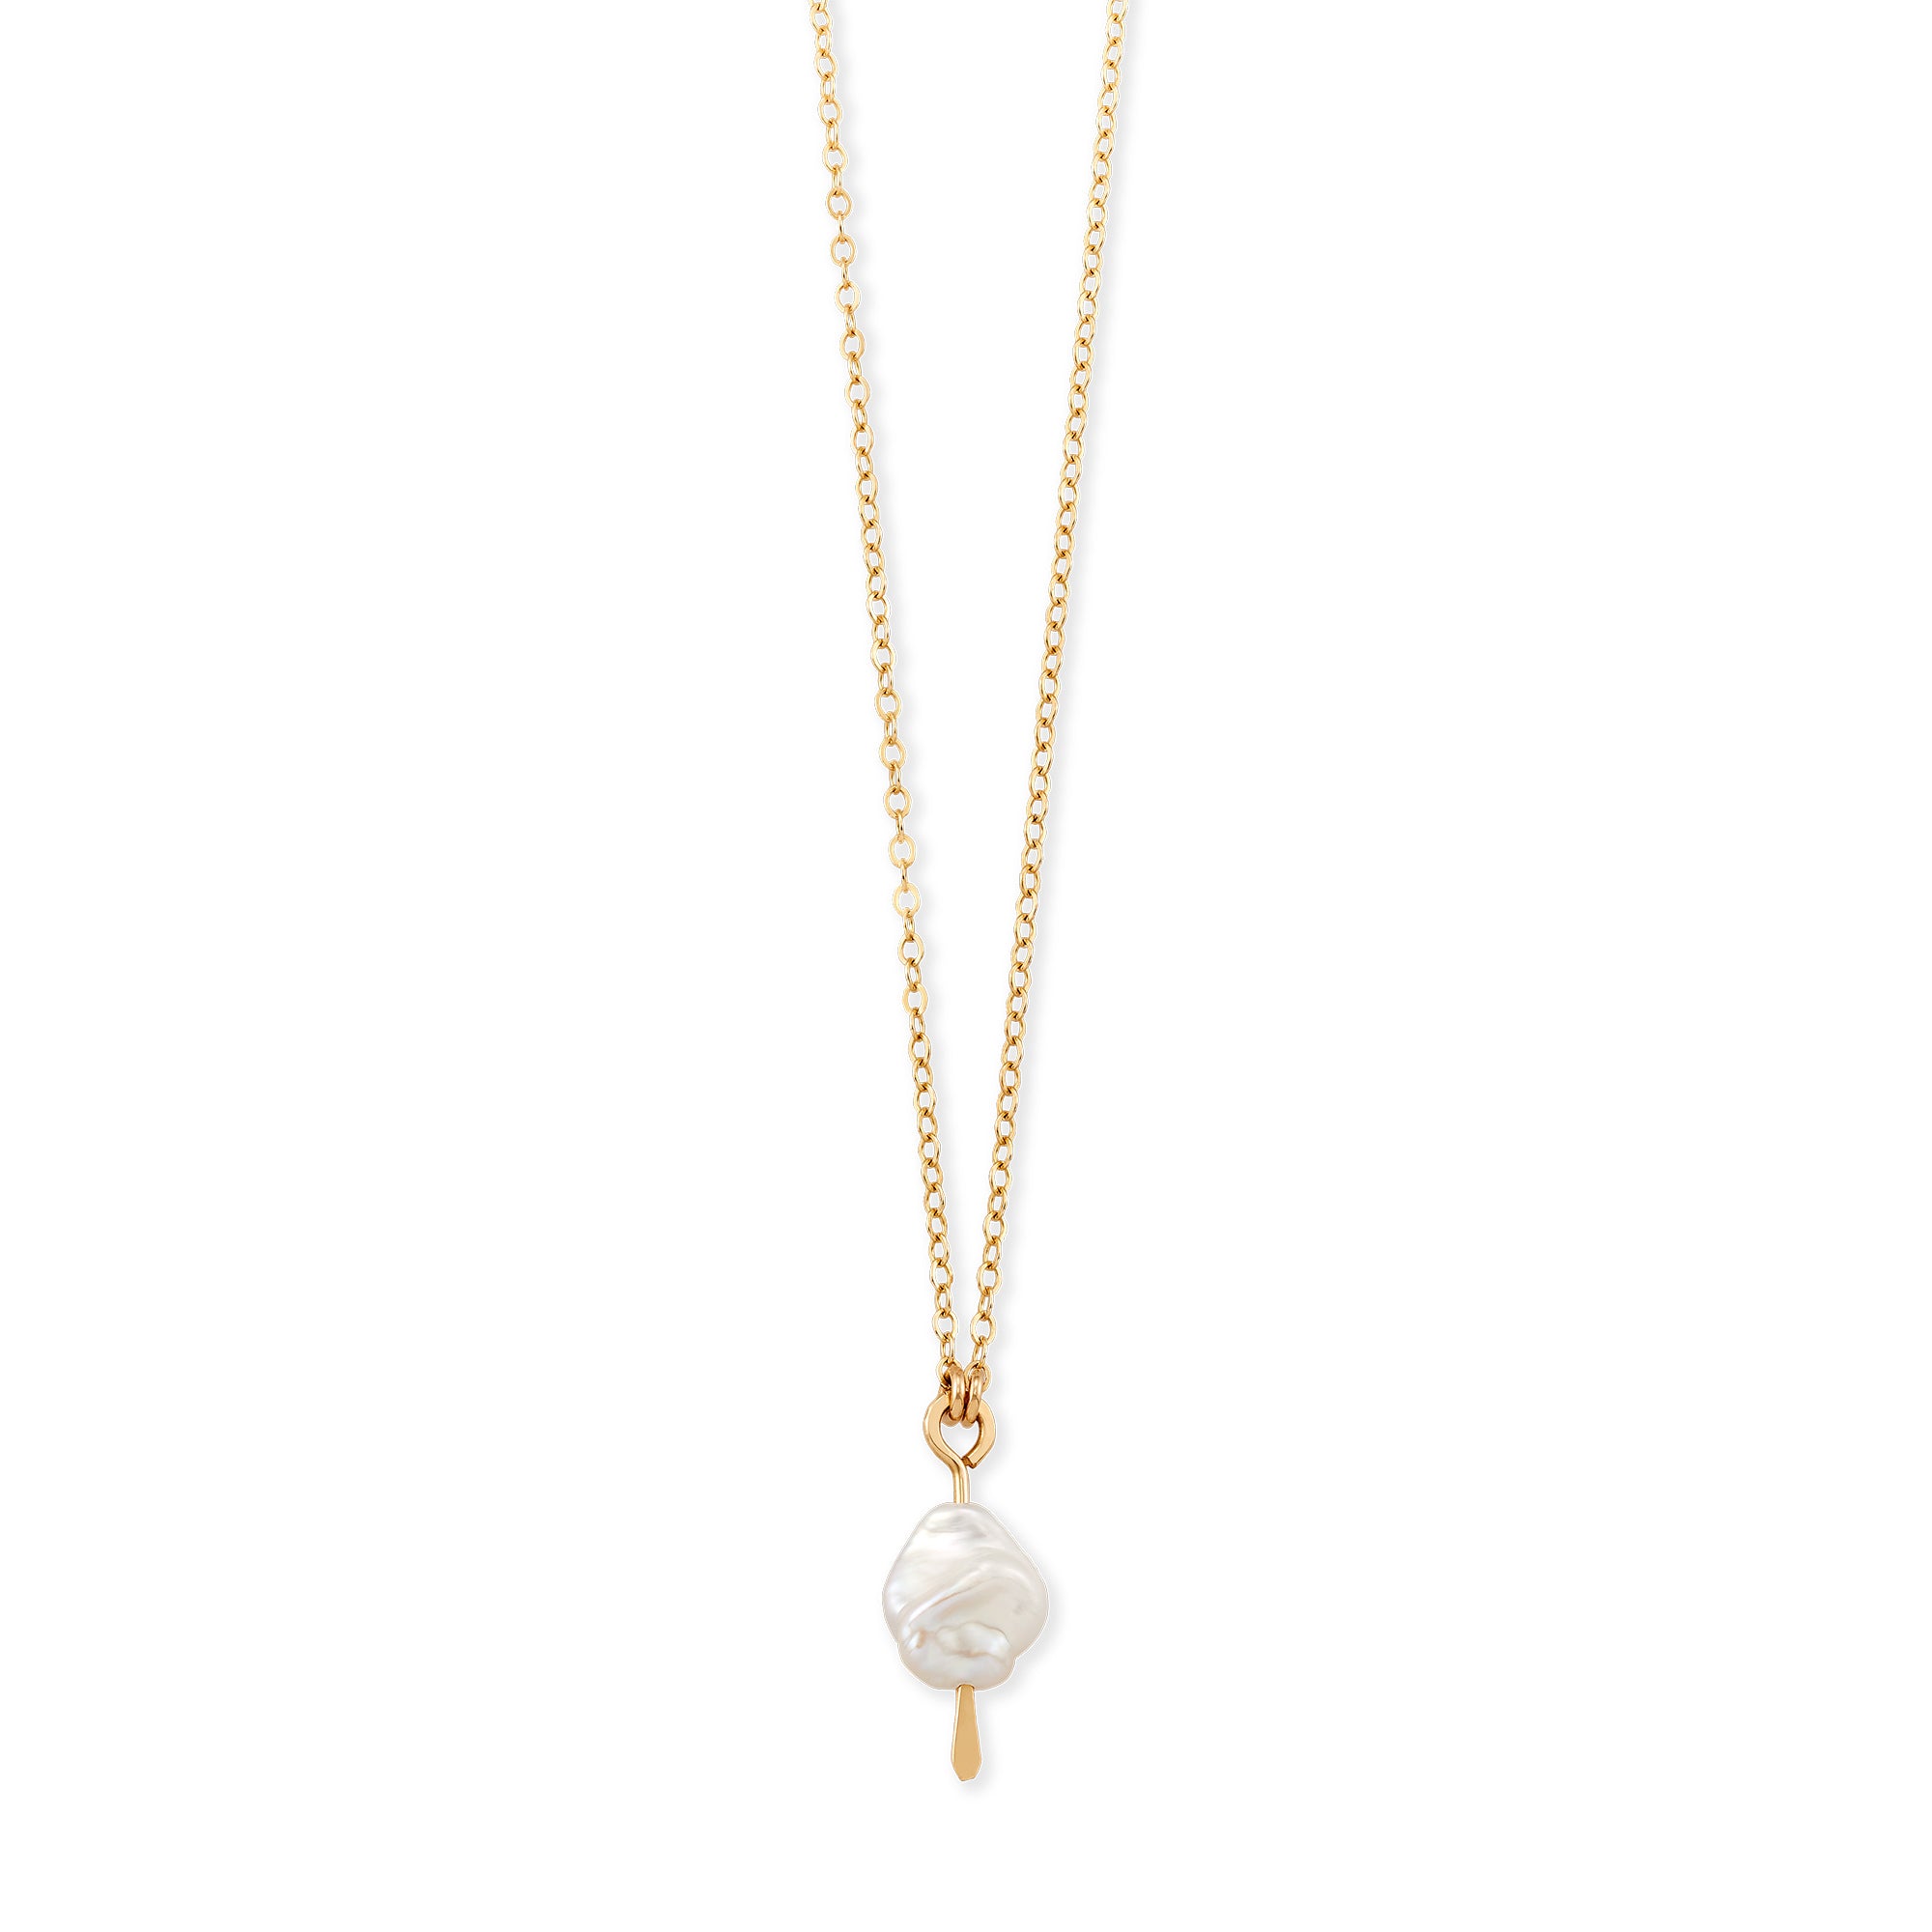 A simple necklace featuring a Keshi pearl drop pendant, the Keshi Pearl Necklace is the perfect update to the classic pearl